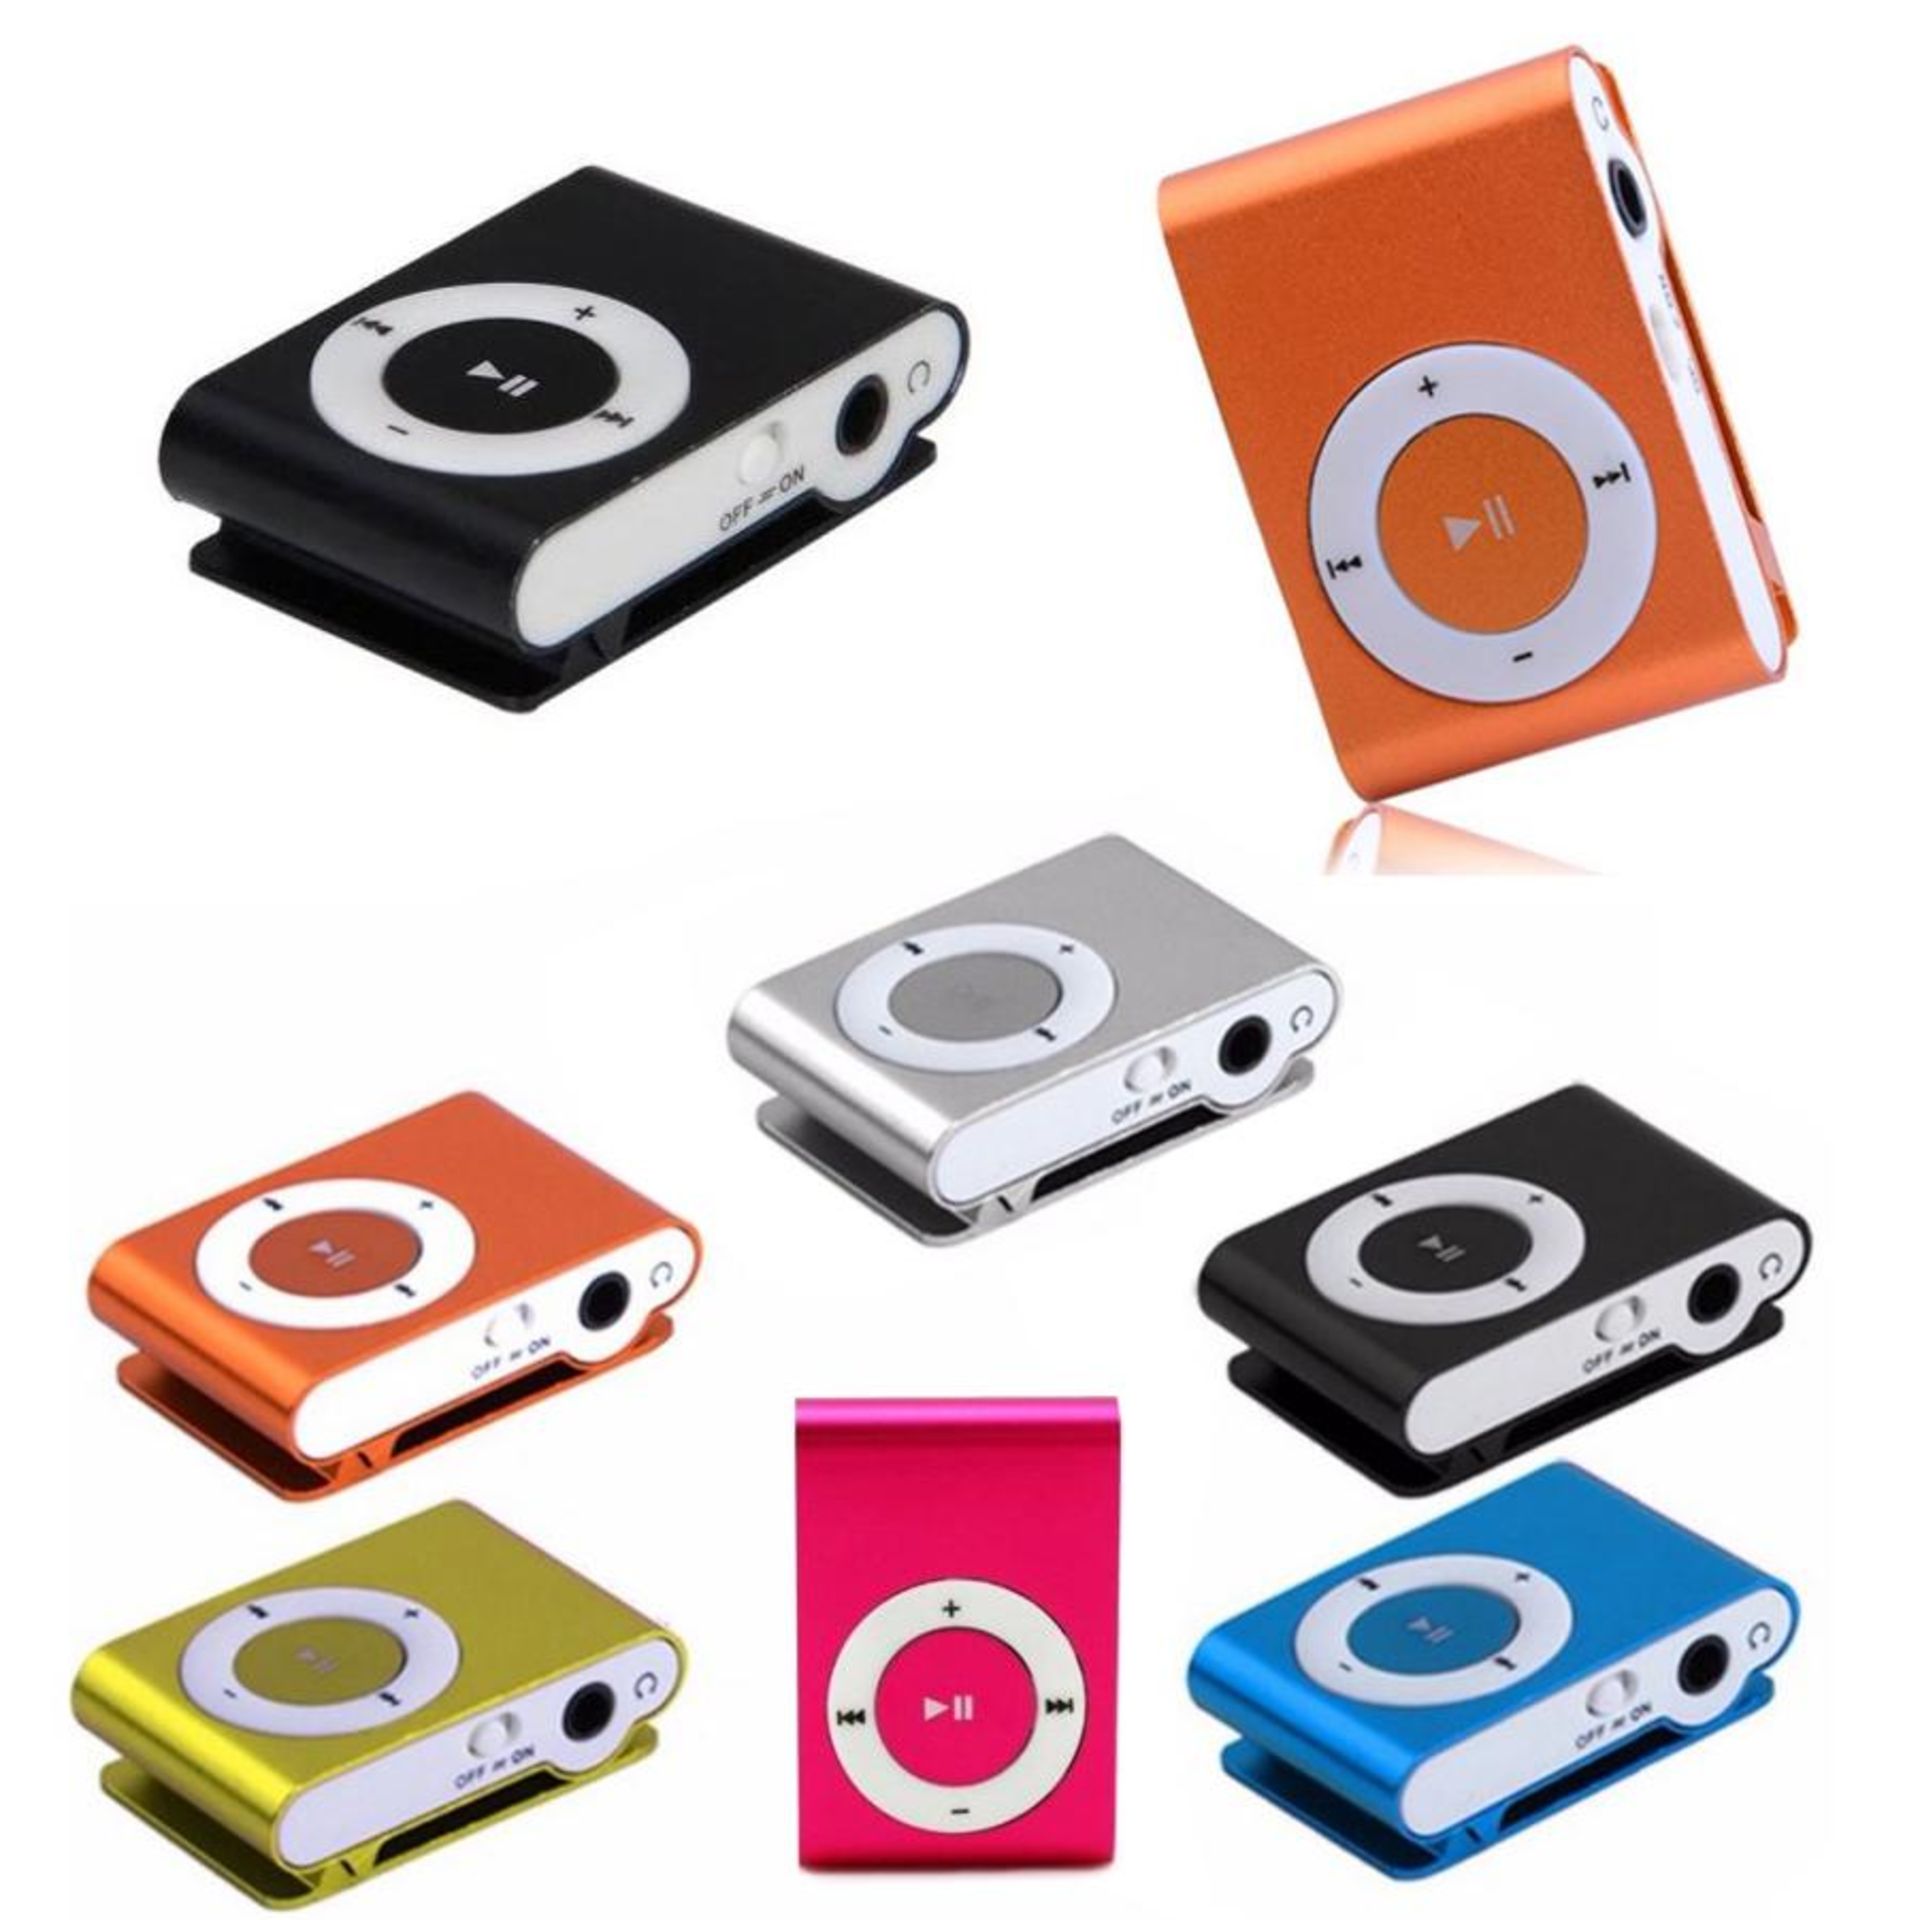 No VAT Brand New Mini Clip Digital USB MP3 Player With SD Card Slot - Ideal For Sports/Outdoor